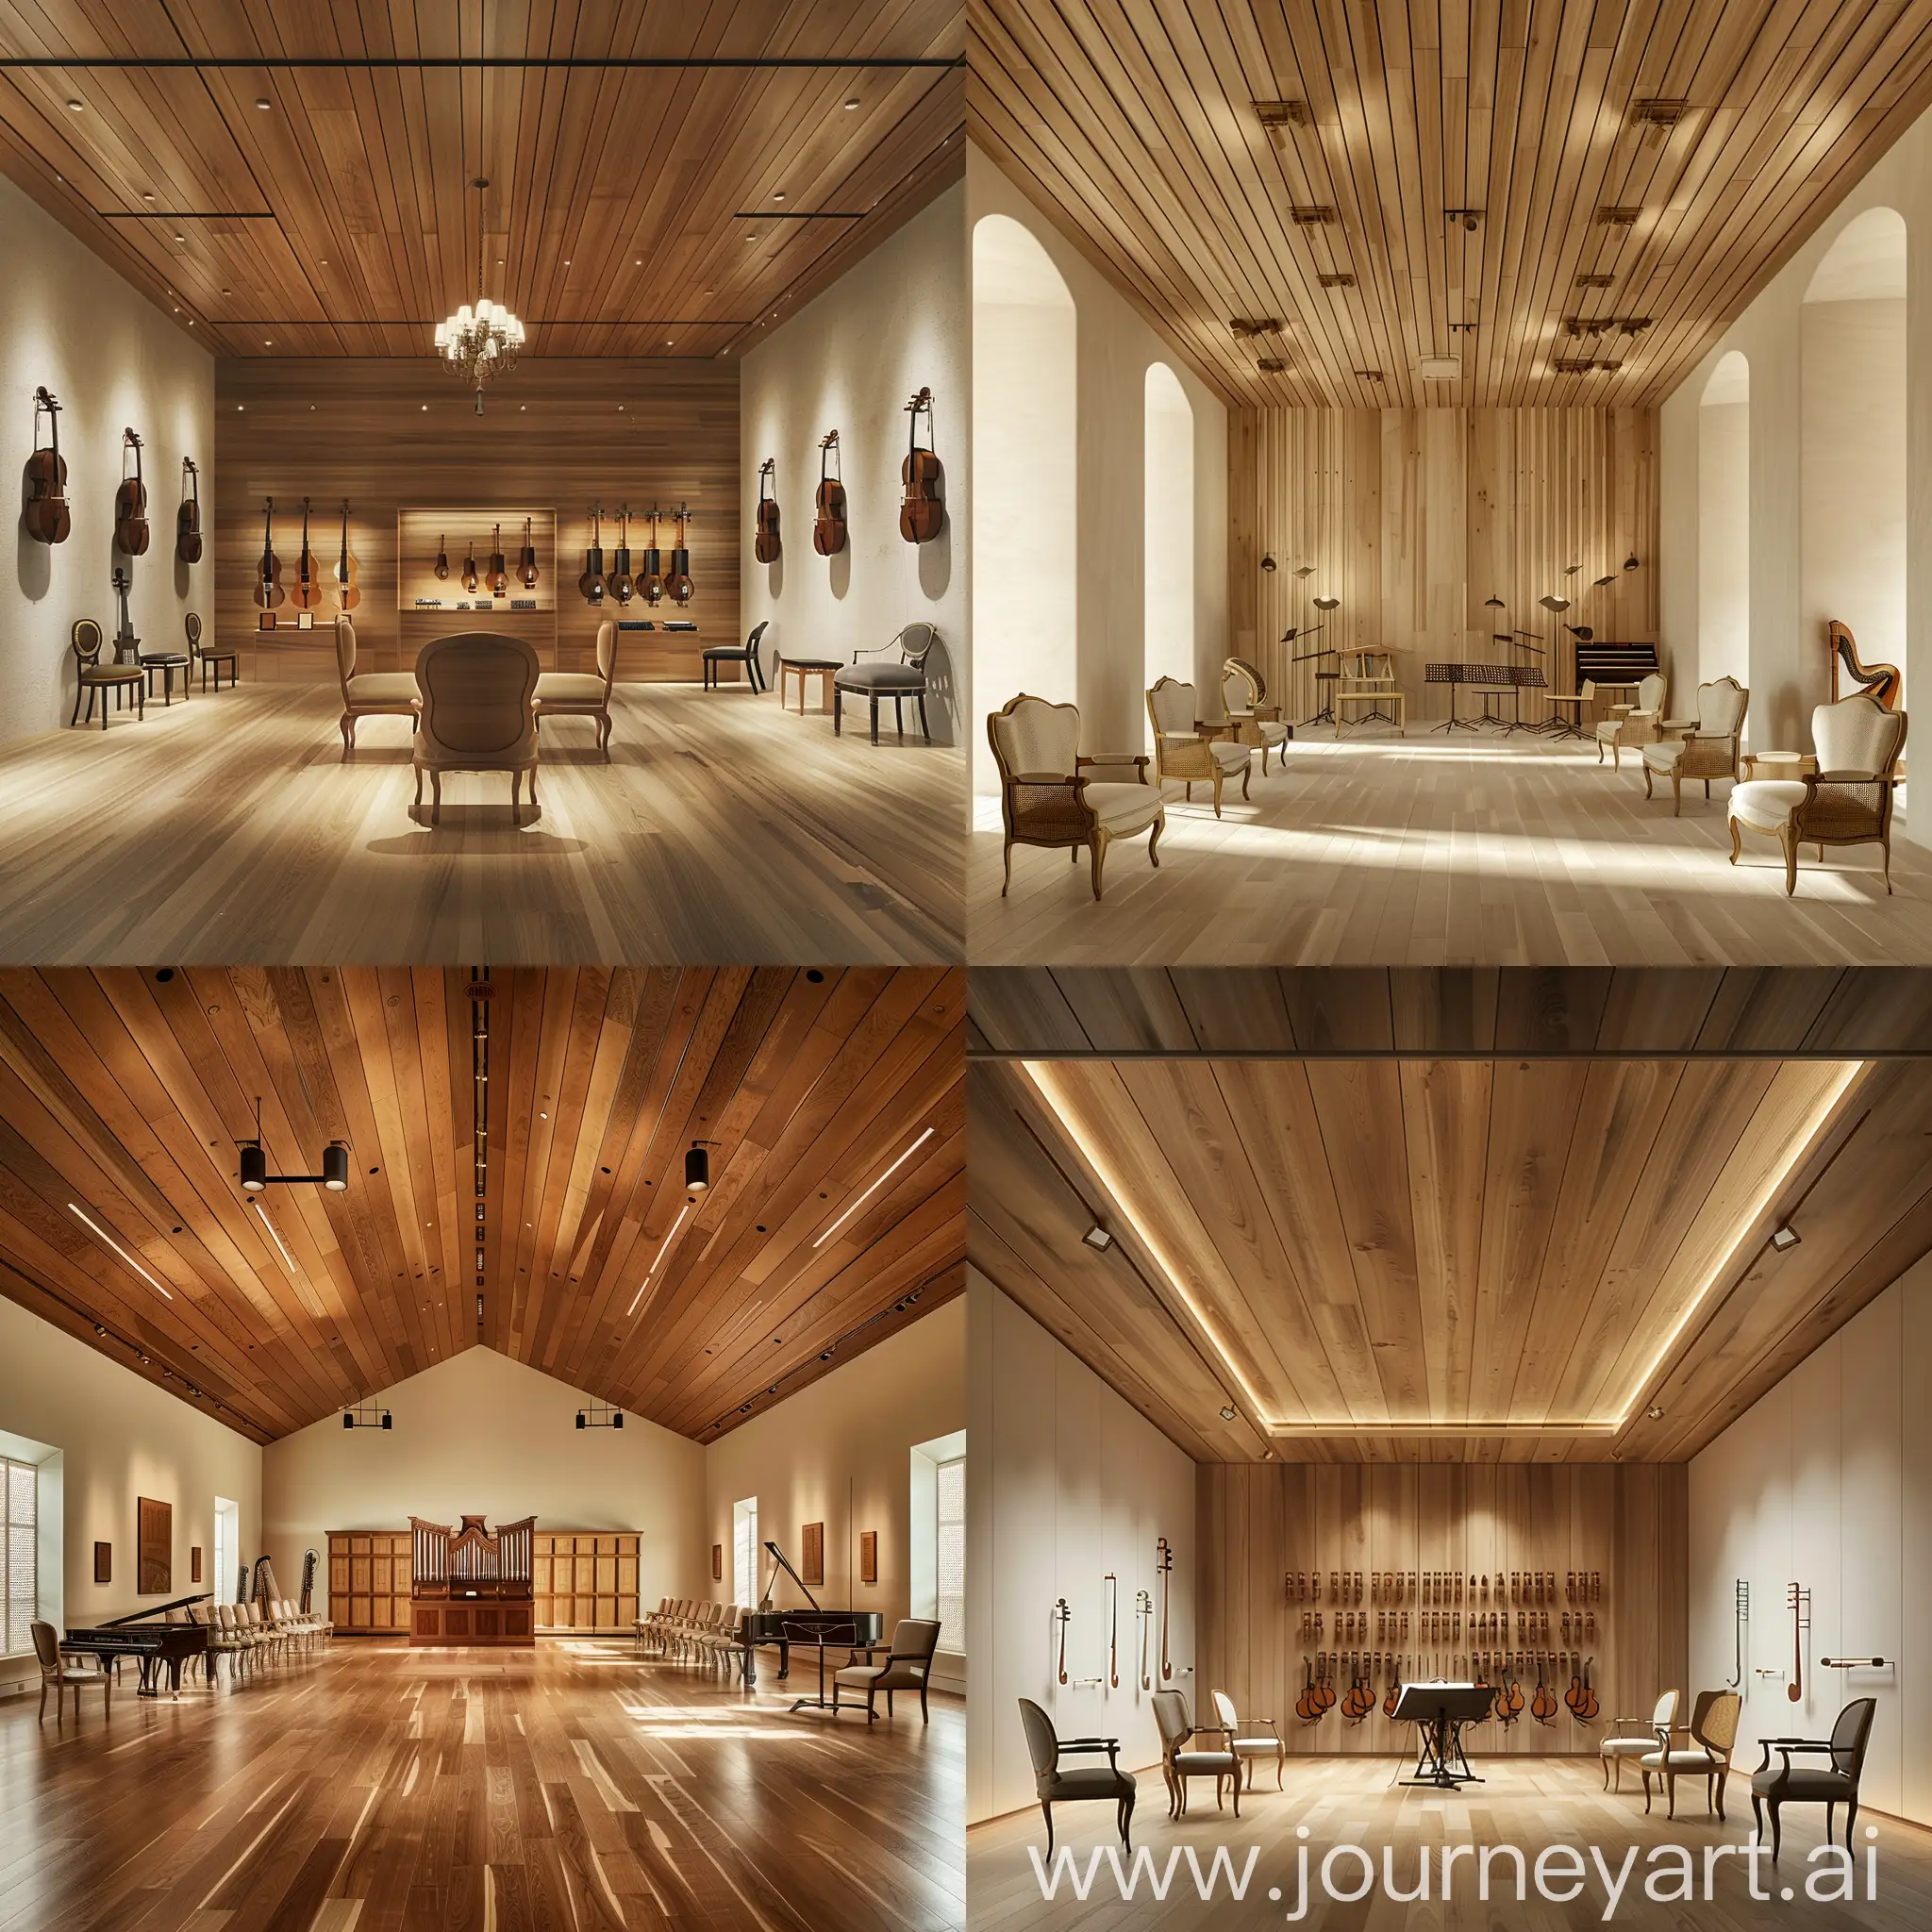 Classical-Music-Museum-Exhibit-with-Wooden-Ceiling-and-Antique-Chairs